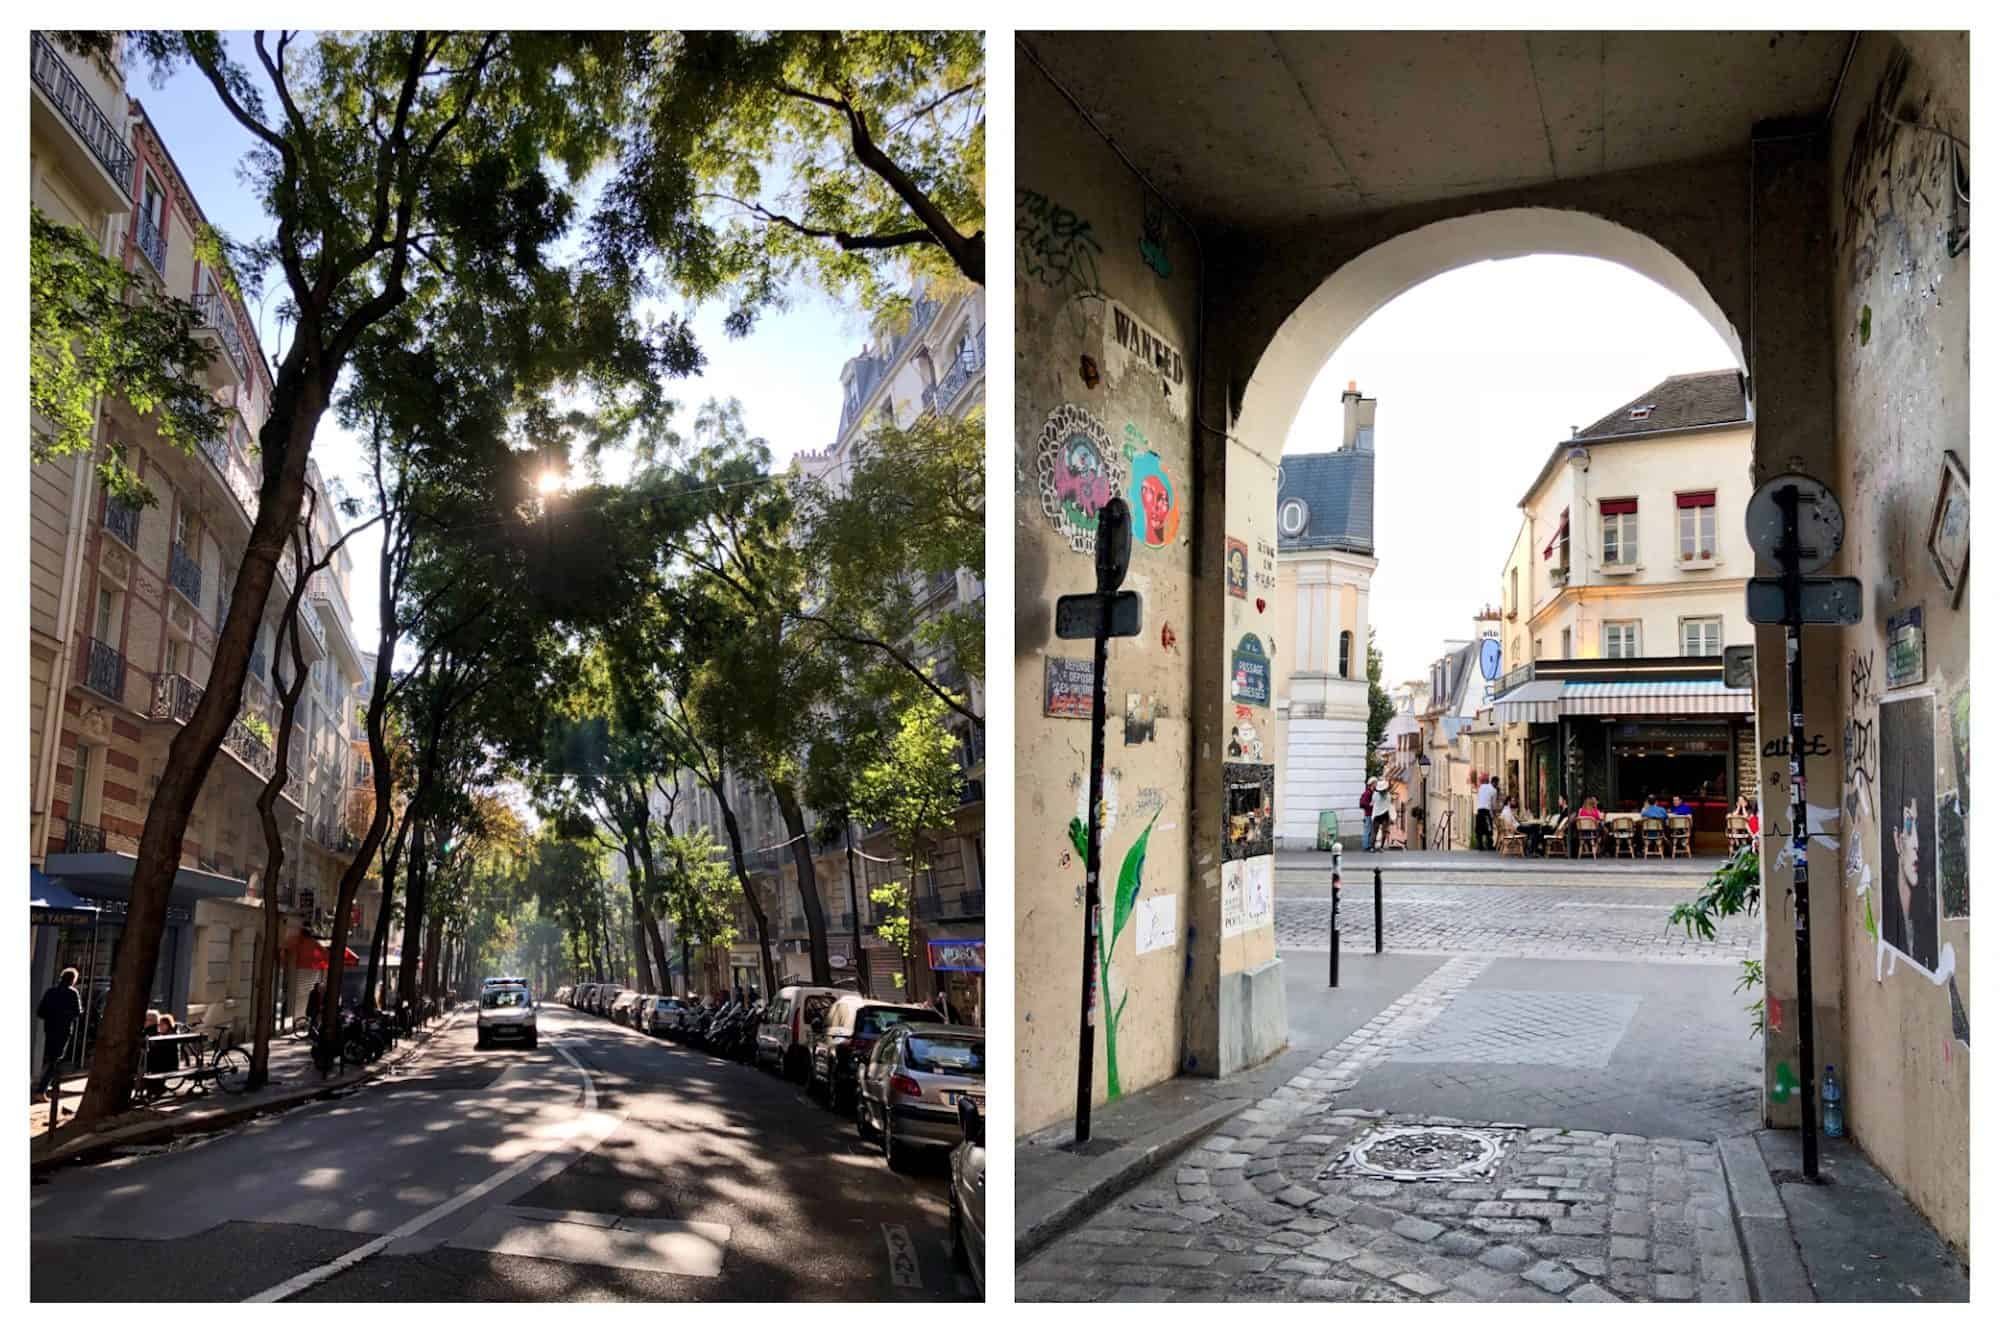 A street shaded by tall trees in Paris in summer (left). An archway in Paris' 10th neighborhood with graffiti and posters on the walls, leading to a street of bars and restaurants (right).